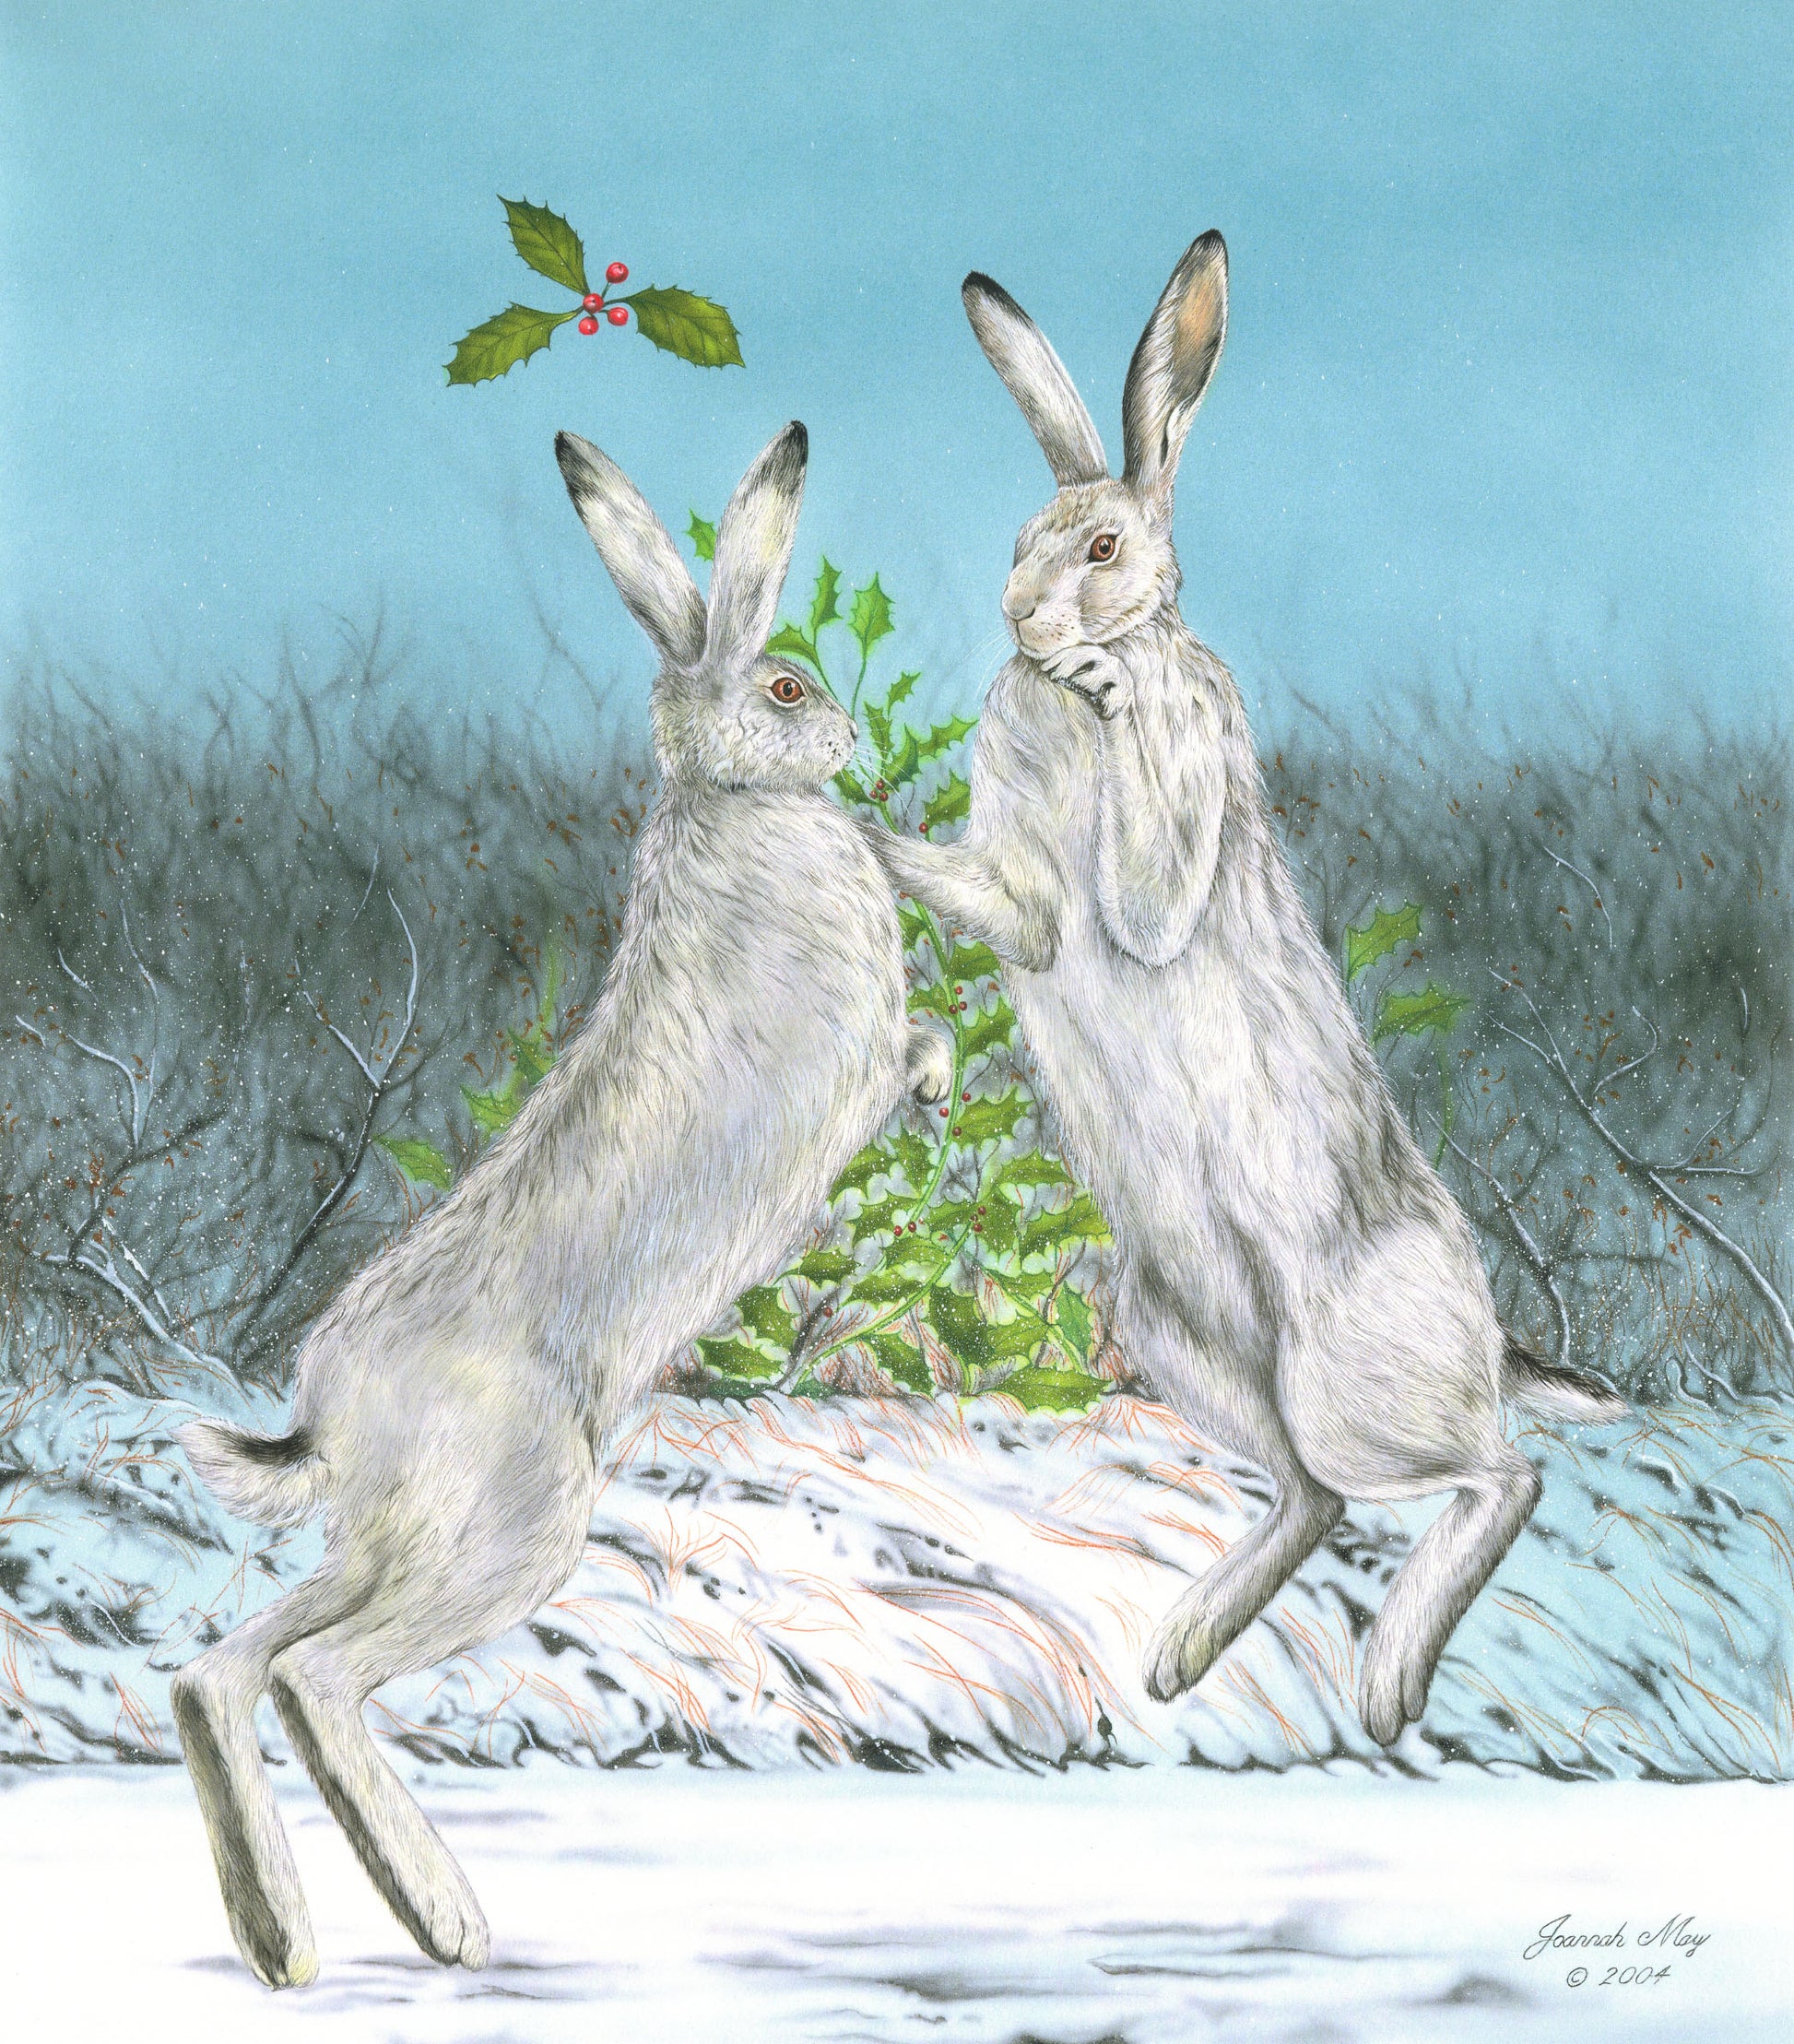 Albino hares boxing with holly leaf backdrop